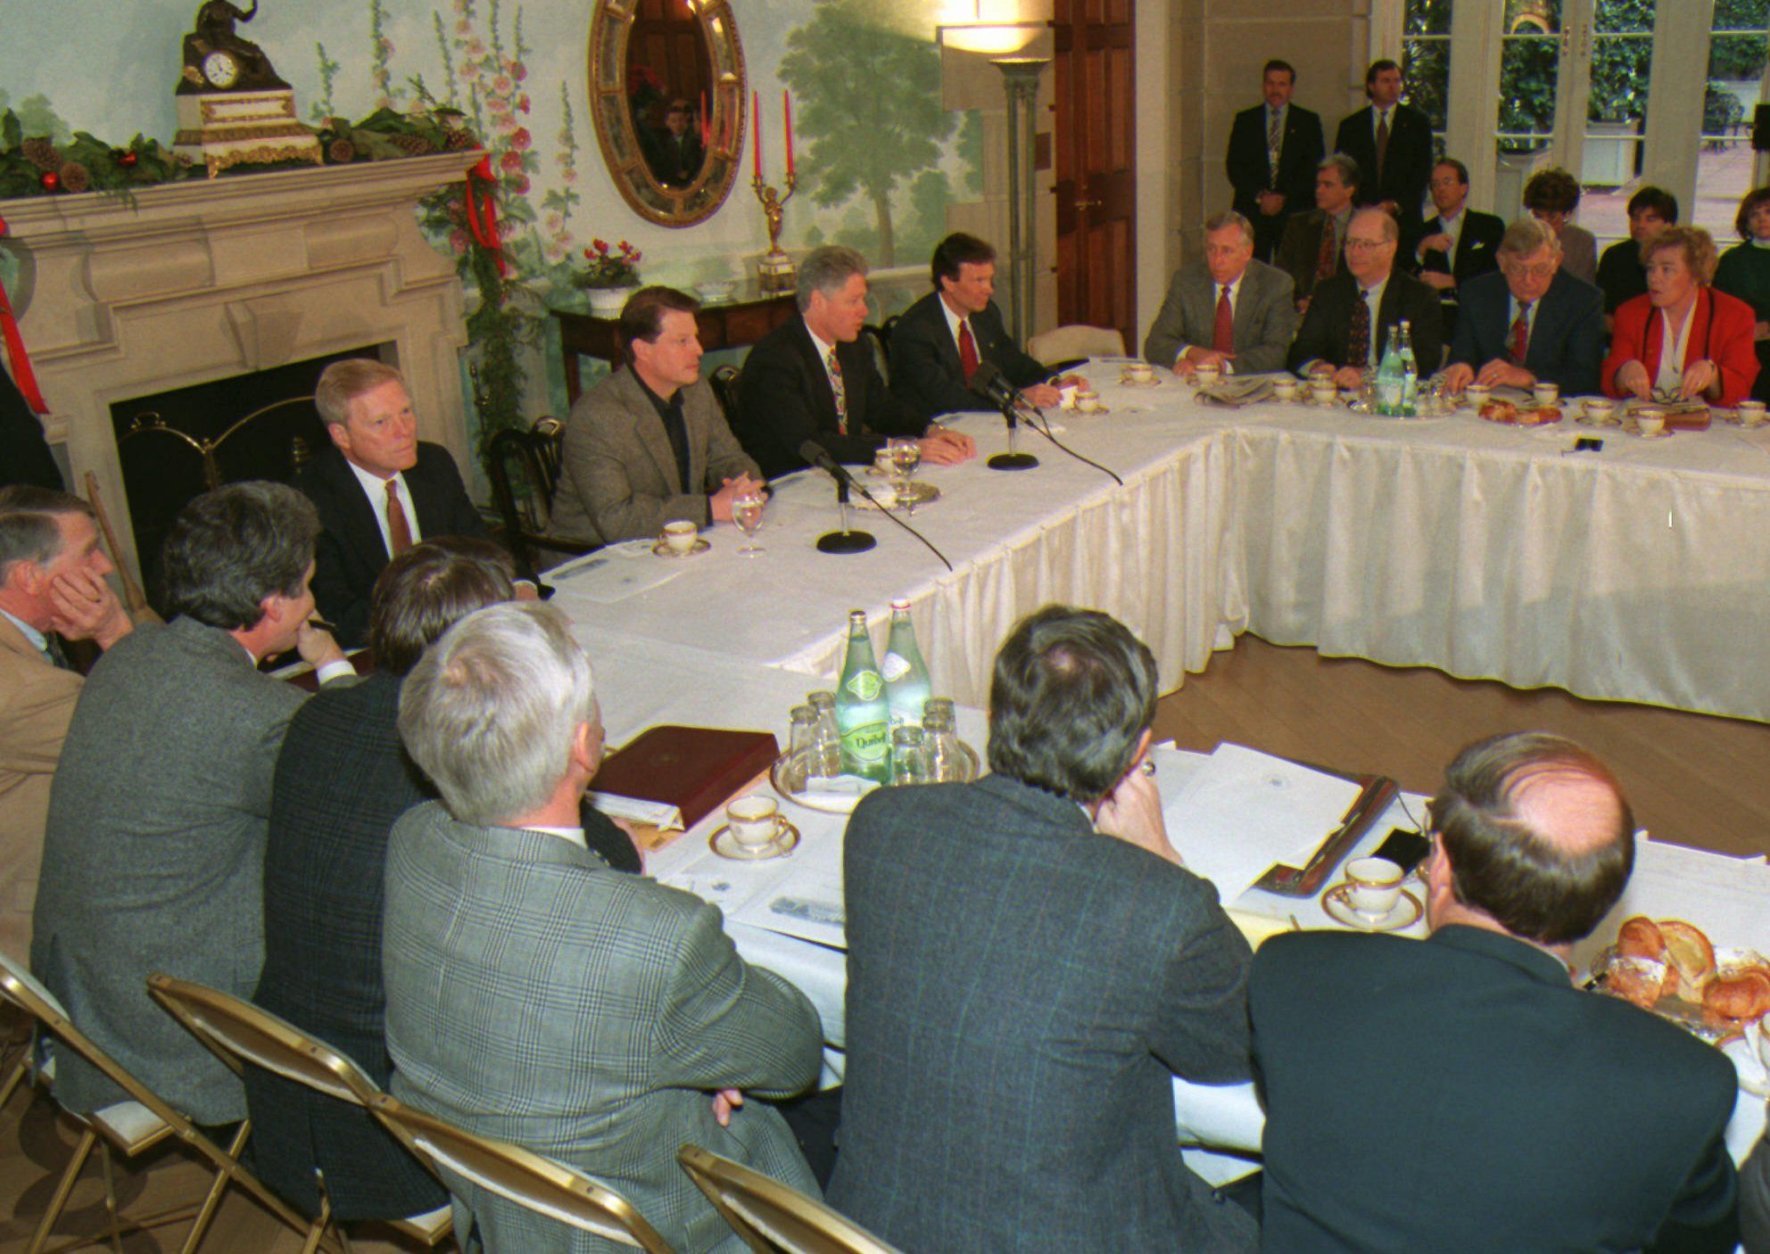 President Clinton speaks to a group of Democratic leaders gathered at Blair House across from the White House Saturday, Dec. 16, 1995 to discuss the federal budget. At the head table with Clinton are, from left, House Minority Leader Richard Gephardt of Missouri, Vice President Al Gore and Senate Minority Leader Thomas Daschle of South Dakota. Parts of the federal government were ordered shut down today as President Clinton blamed the Republican Congress for attempting to force unacceptable cuts in programs affecting the lives of children, the elderly and the poor.  (AP Photo/J. Scott Applewhite)